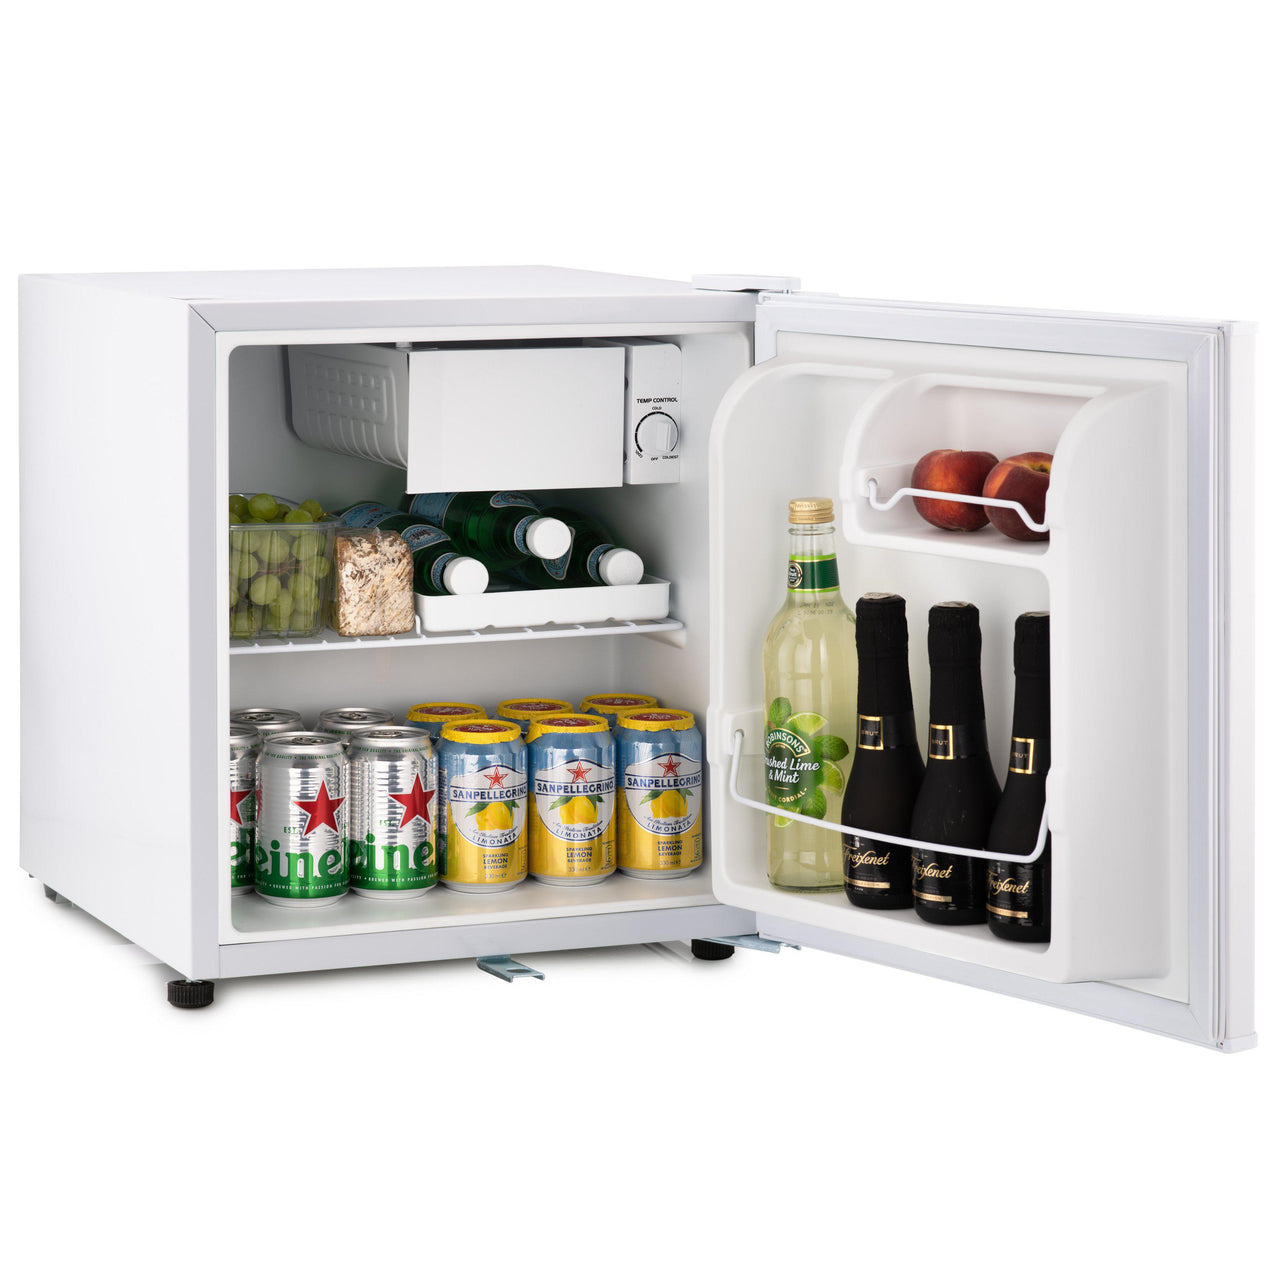 Subcold Eco 50 litre mini fridge with snacks and drinks inside